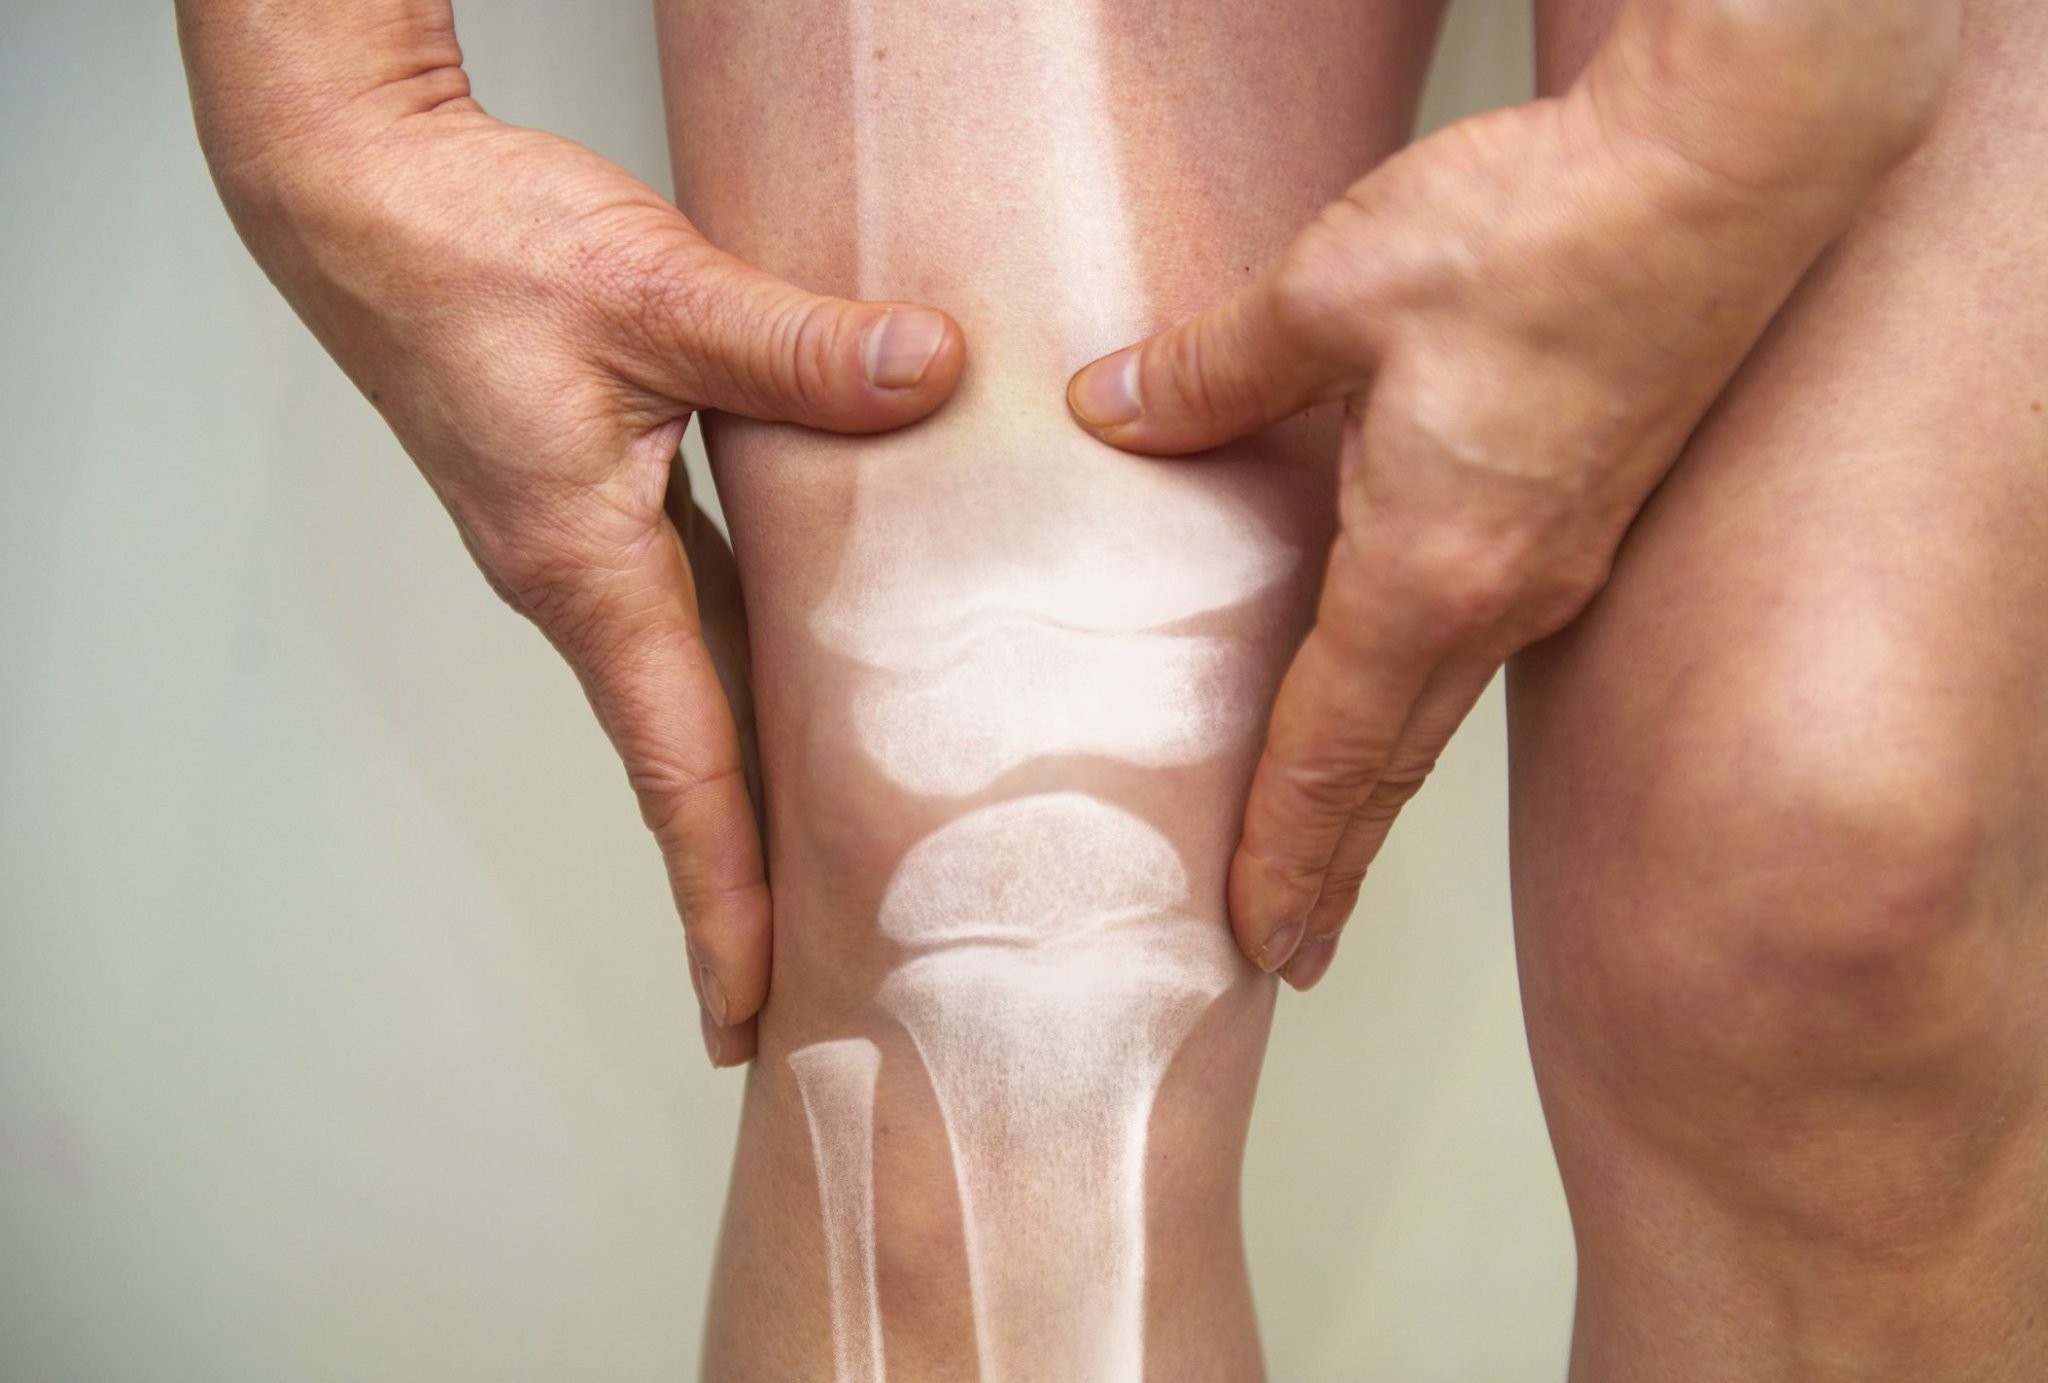 Want Healthy Joints and Cartilage? Make Sure You’re Doing These 8 Things